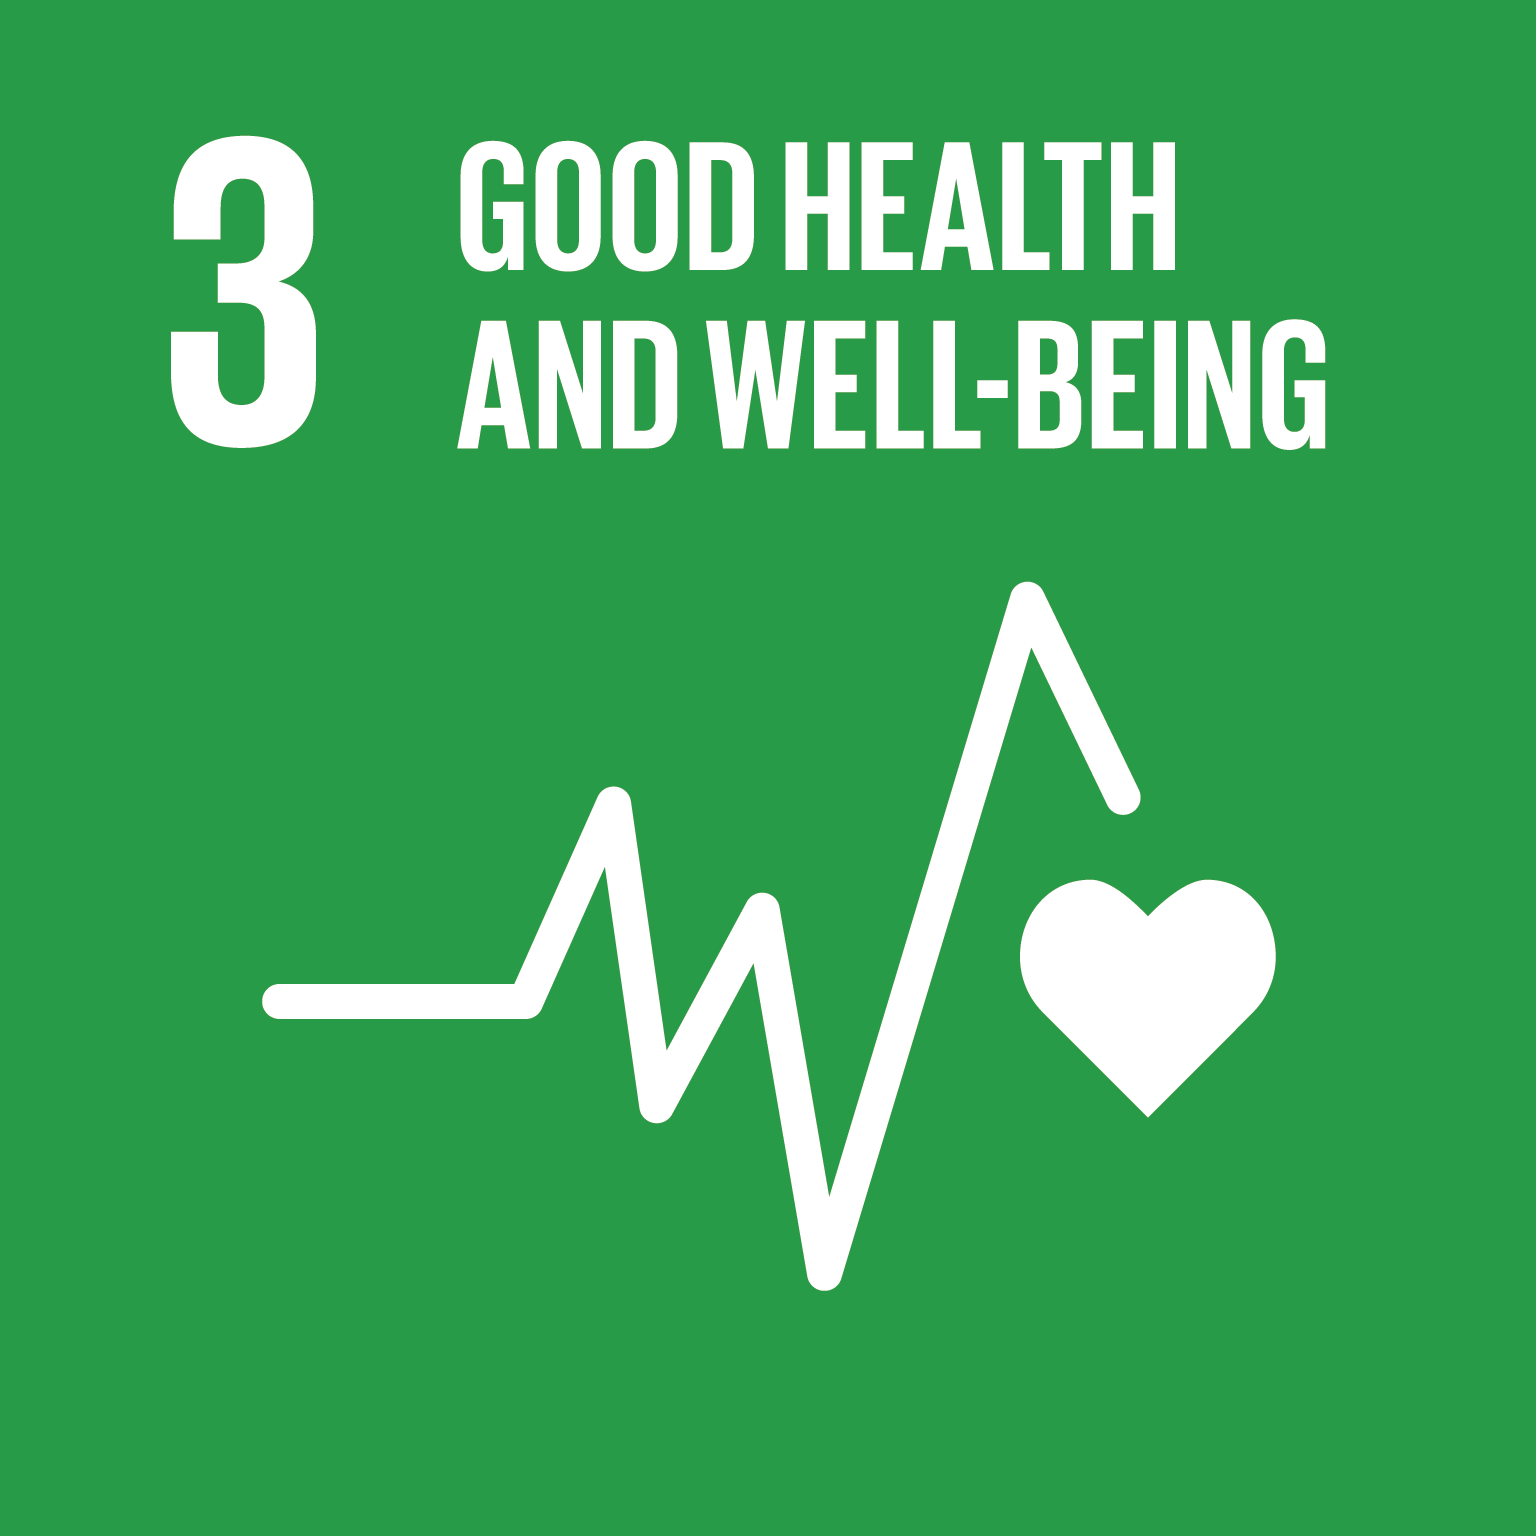 Goal 3 - Good Health & Well-Being